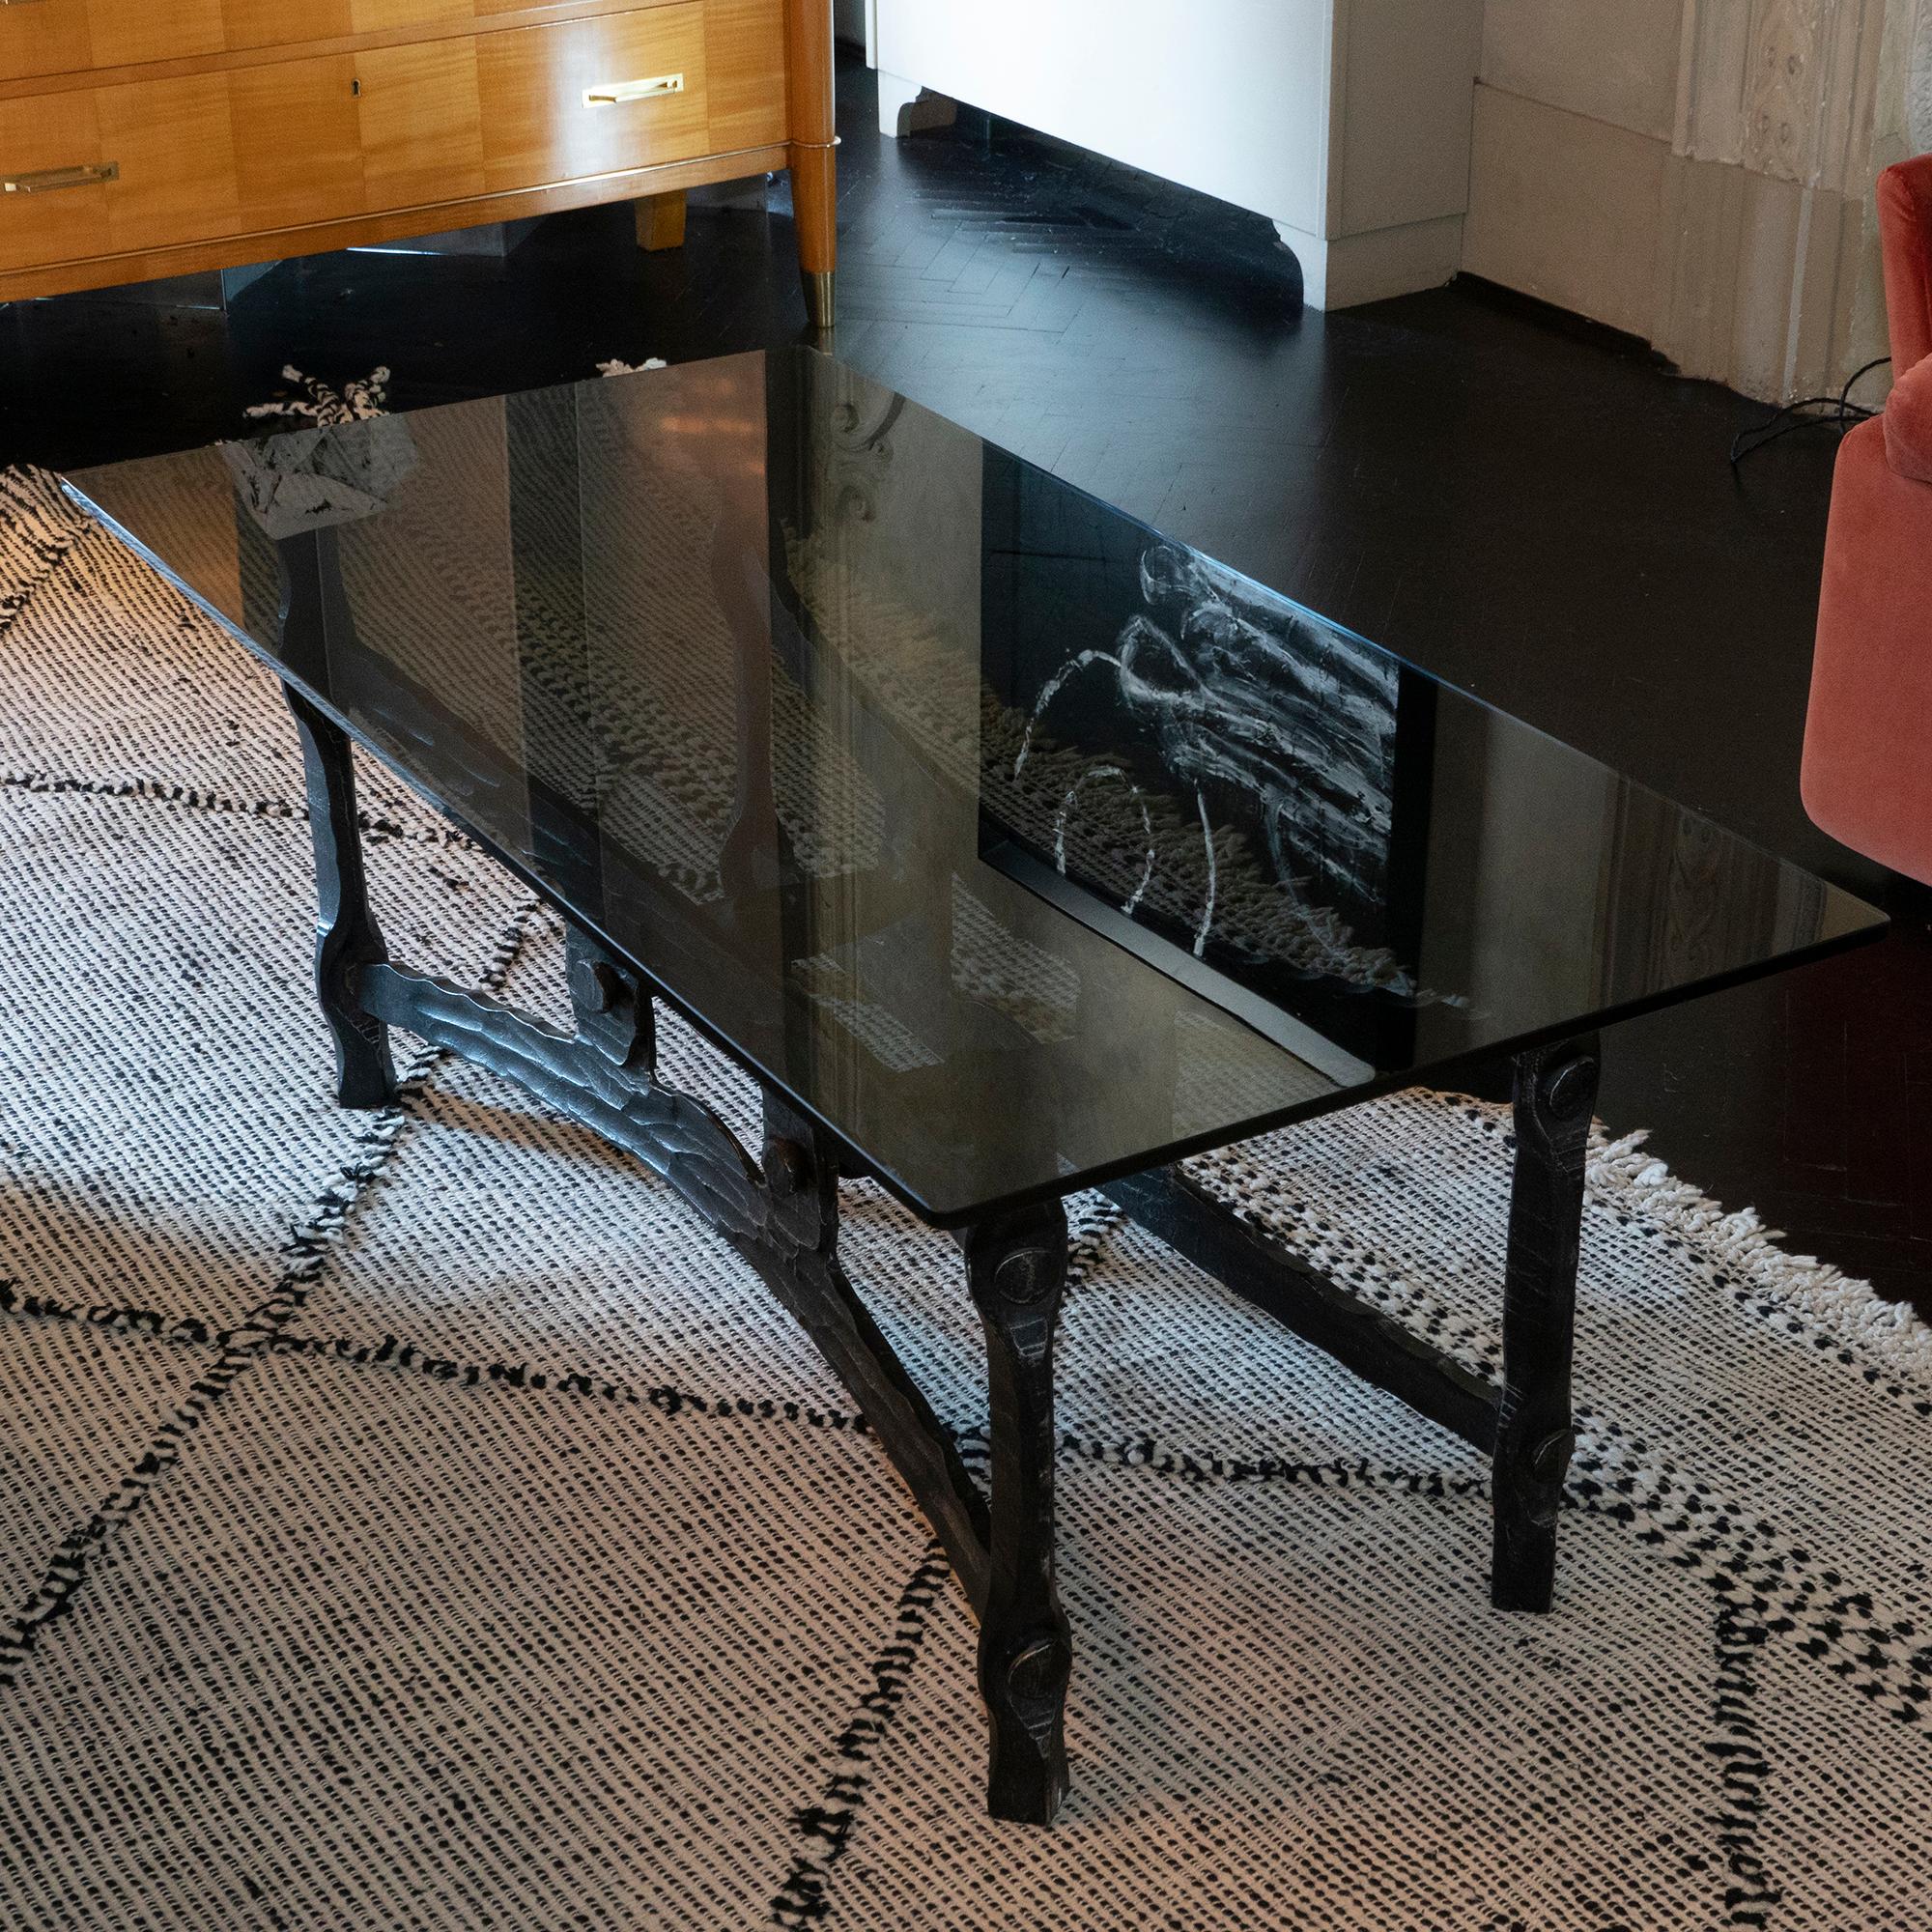 Forged and hammered iron coffee table base, new smoked glass top, France, 1940s.
 